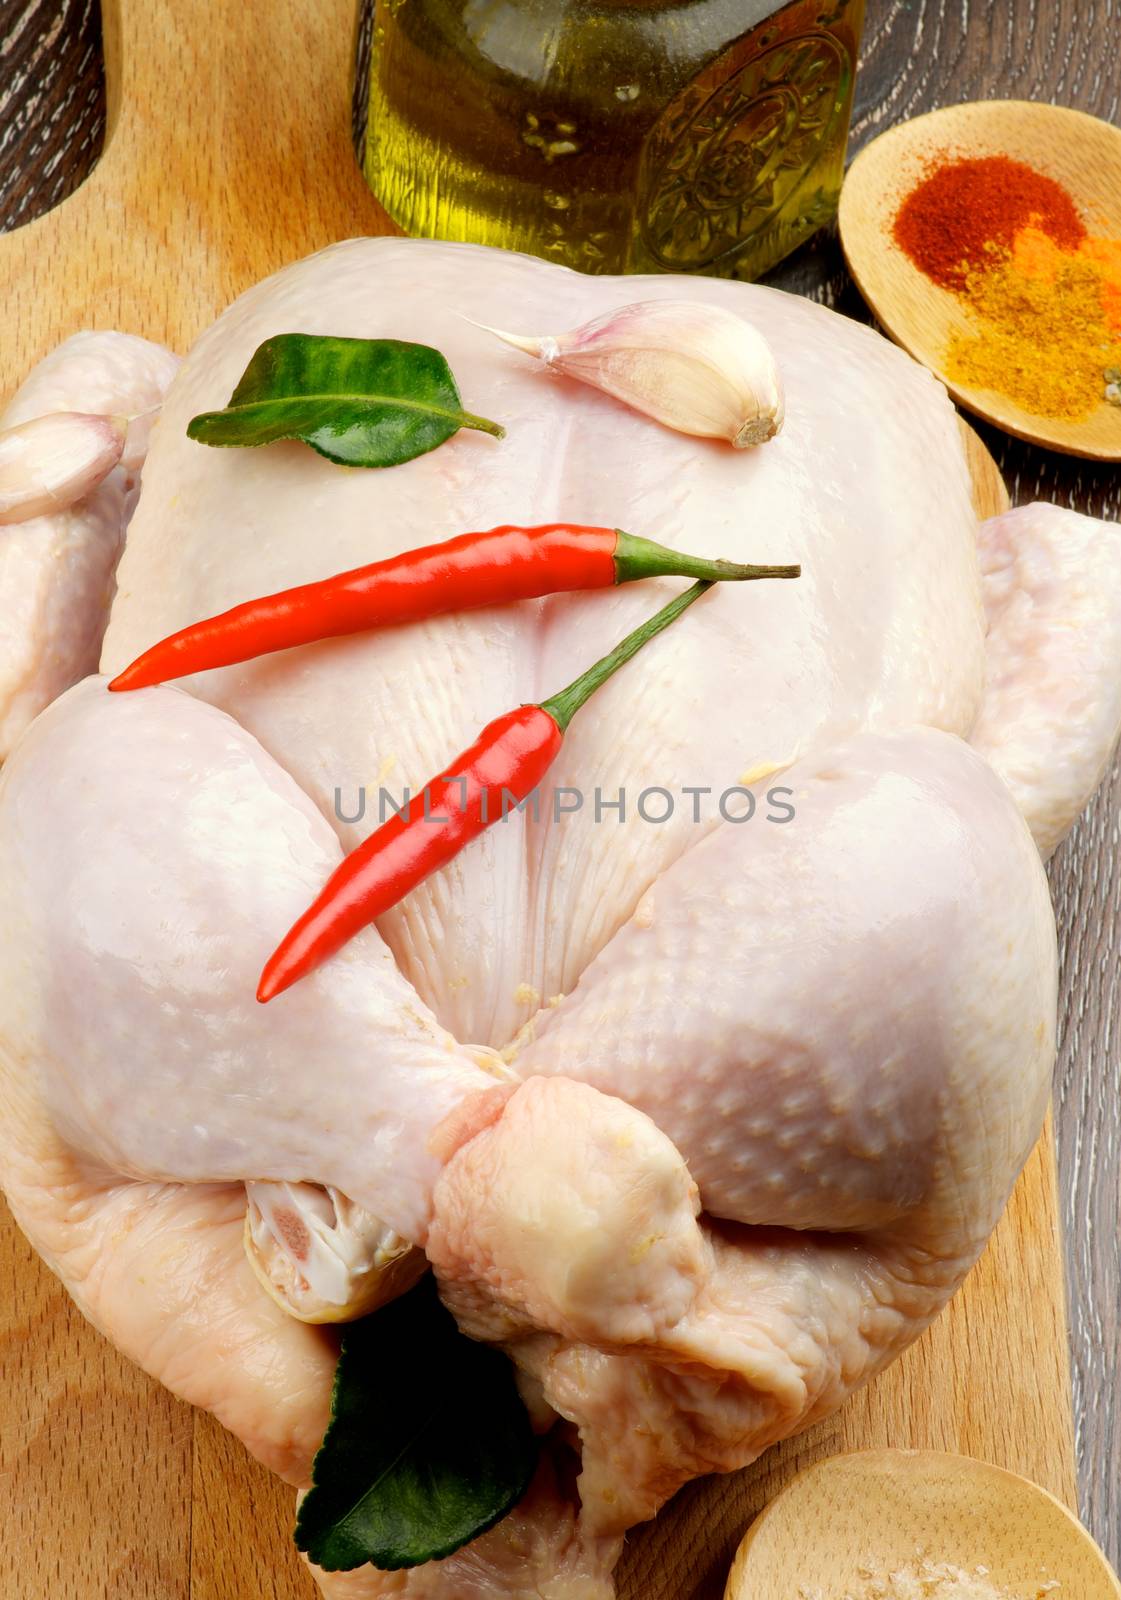 Big Raw Chicken Full Body Trussed and Ready to Roast with Hot Crushed Spices, Chili Peppers, Garlic and Olive Oil closeup on Wooden Cutting Board